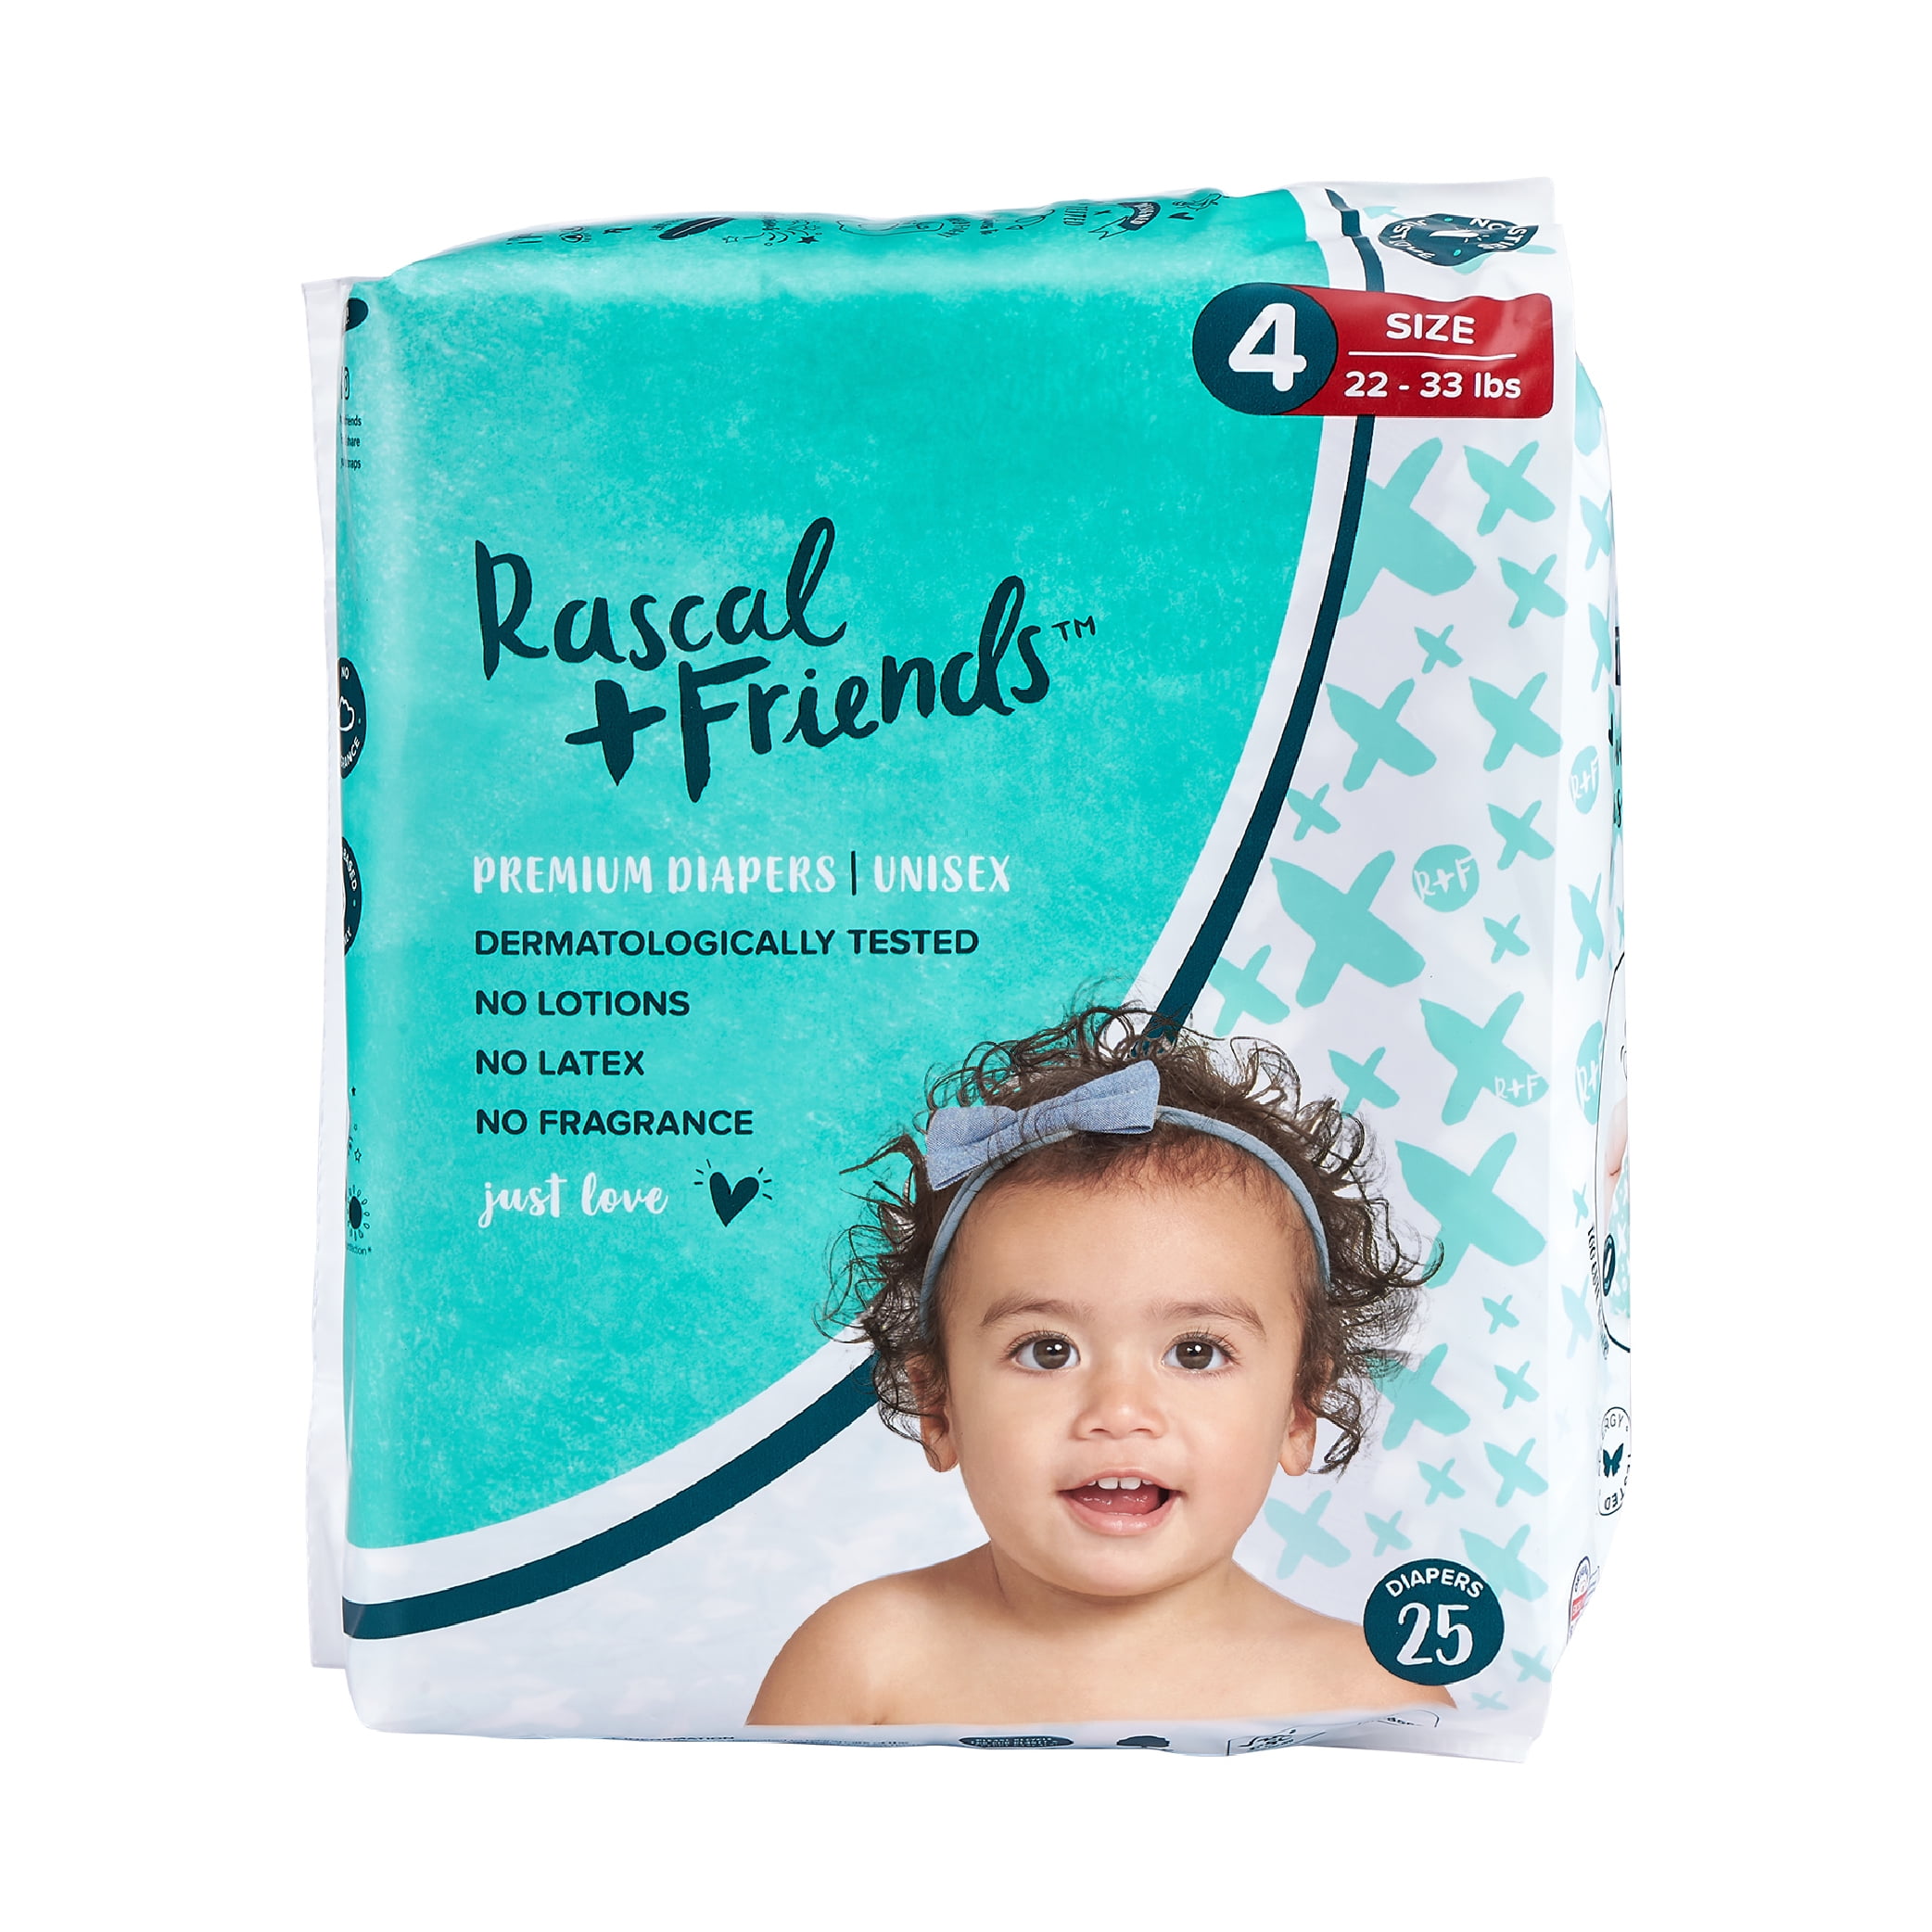 Buy Rascal + Friends Nappies Size 4 Toddler Jumbo 72 pack